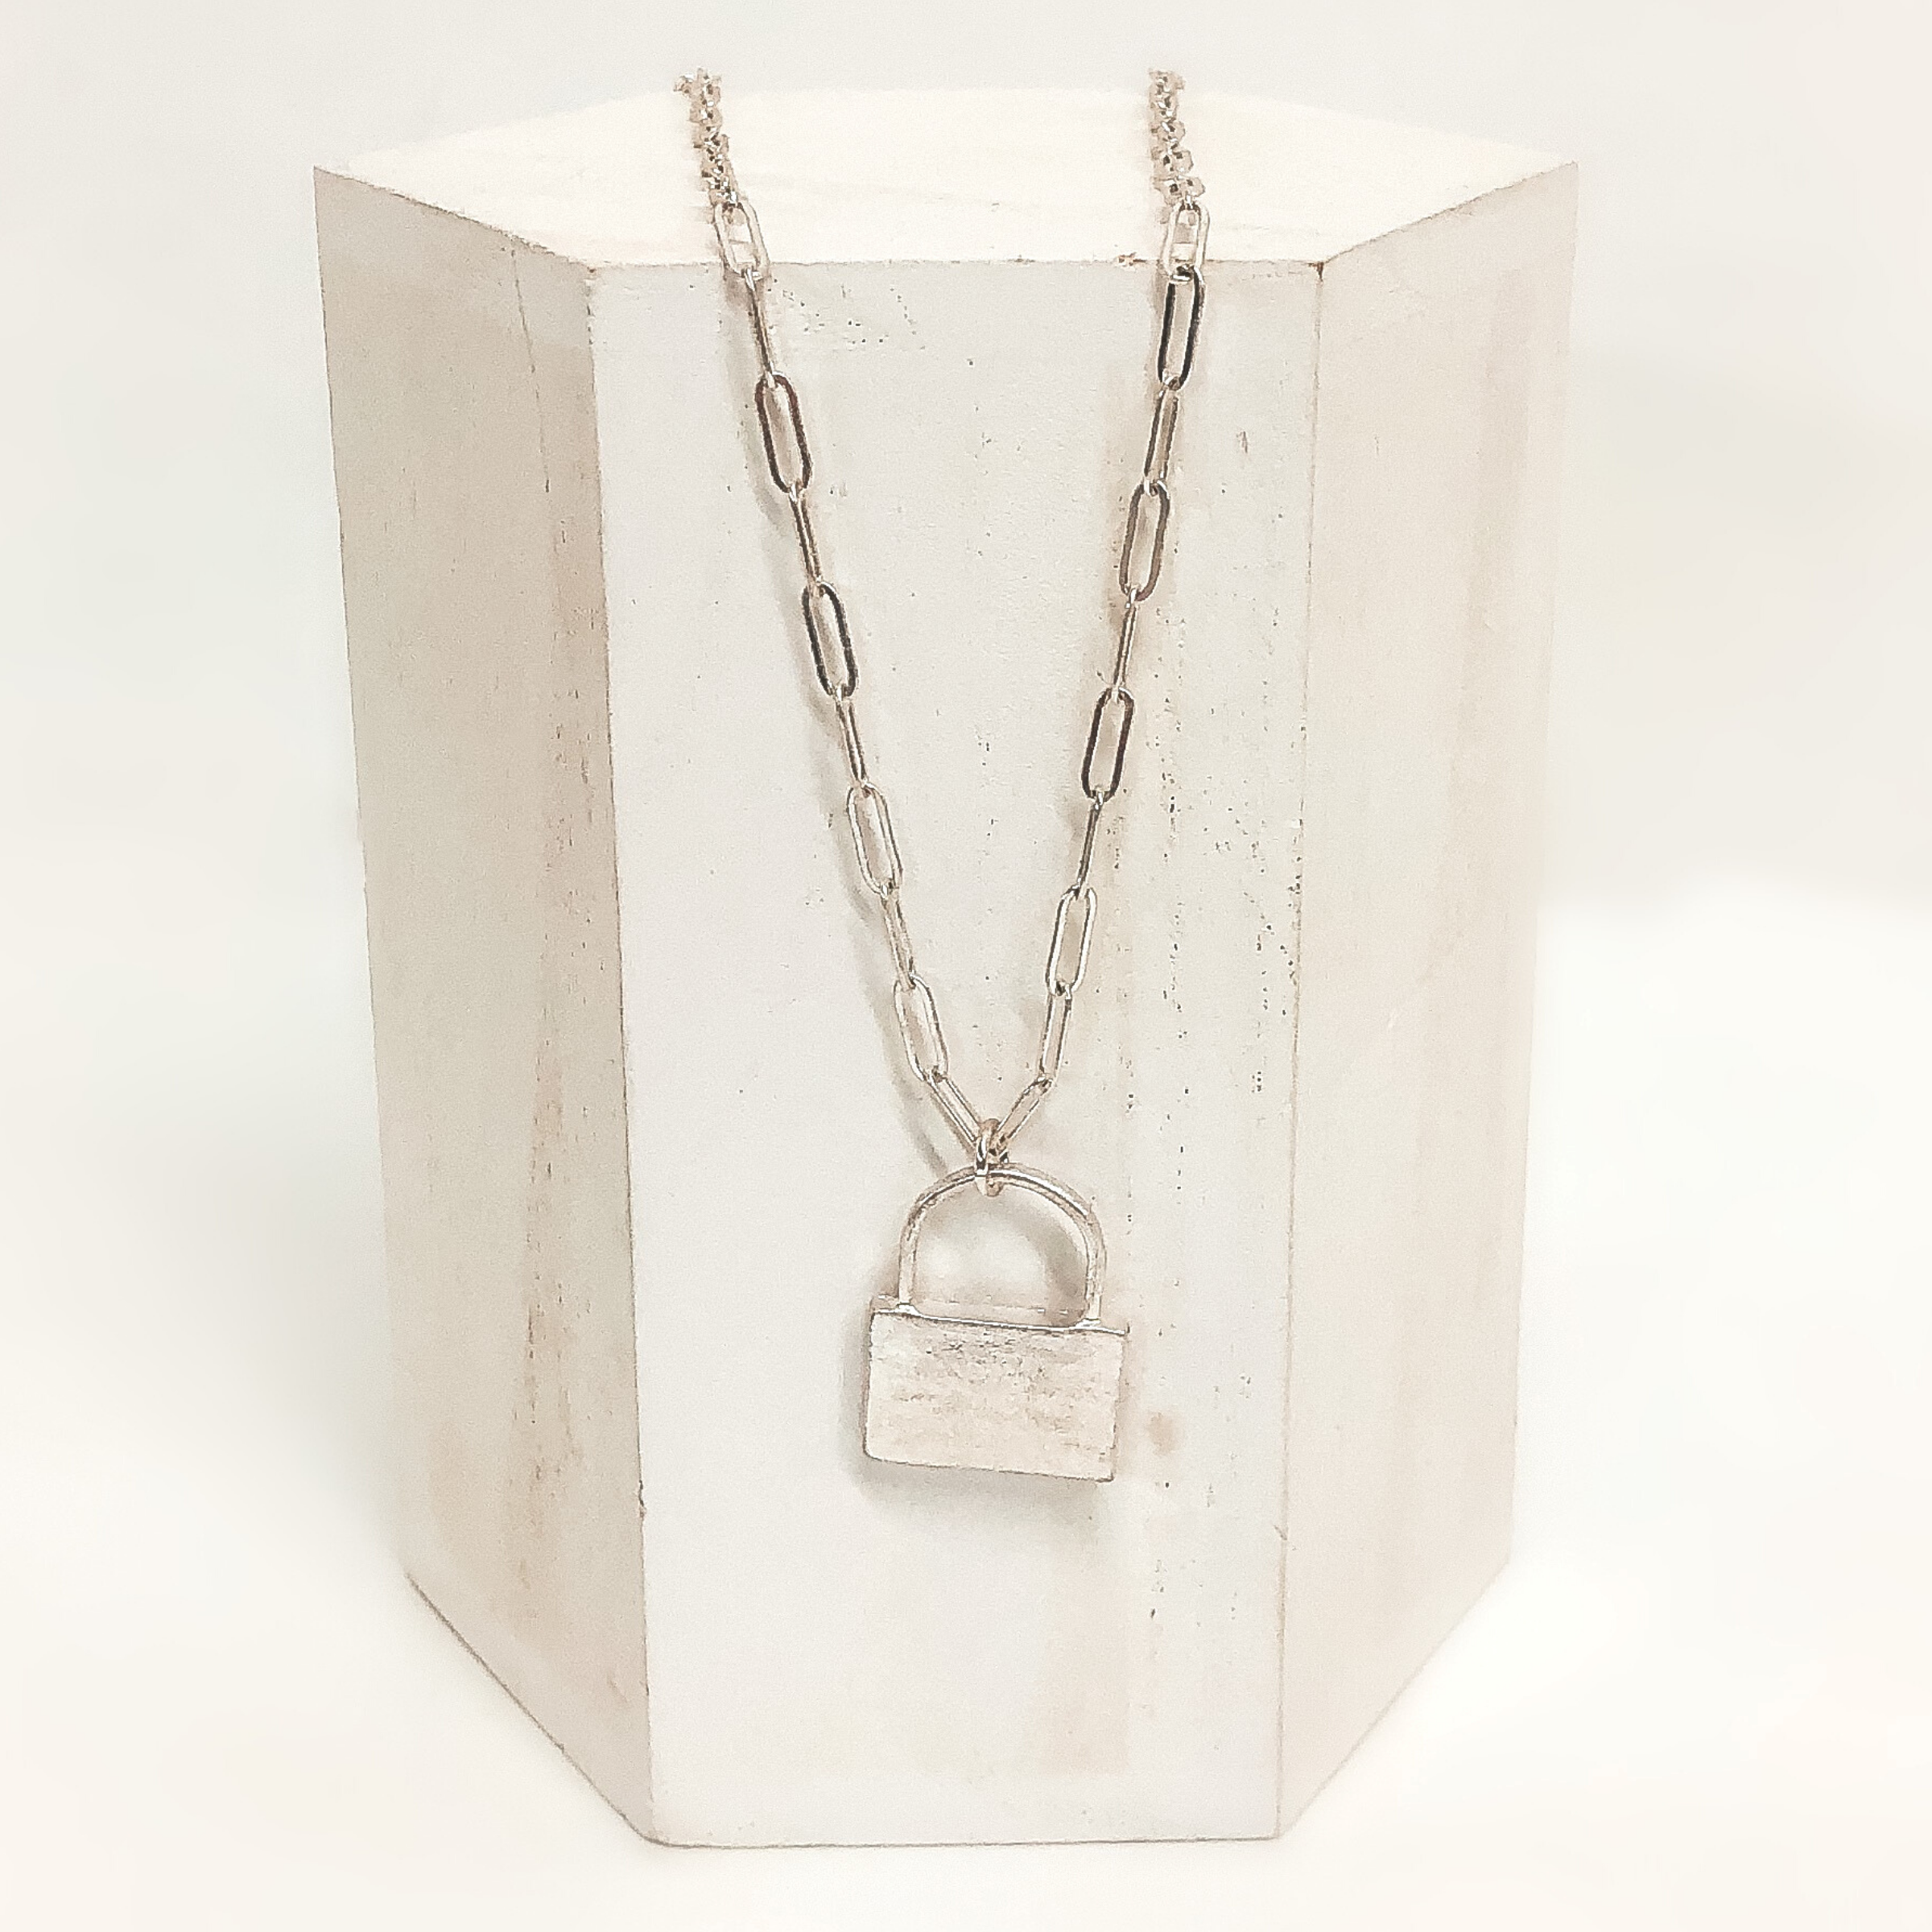 Locked In Necklace with Lock Pendant in Silver - Giddy Up Glamour Boutique